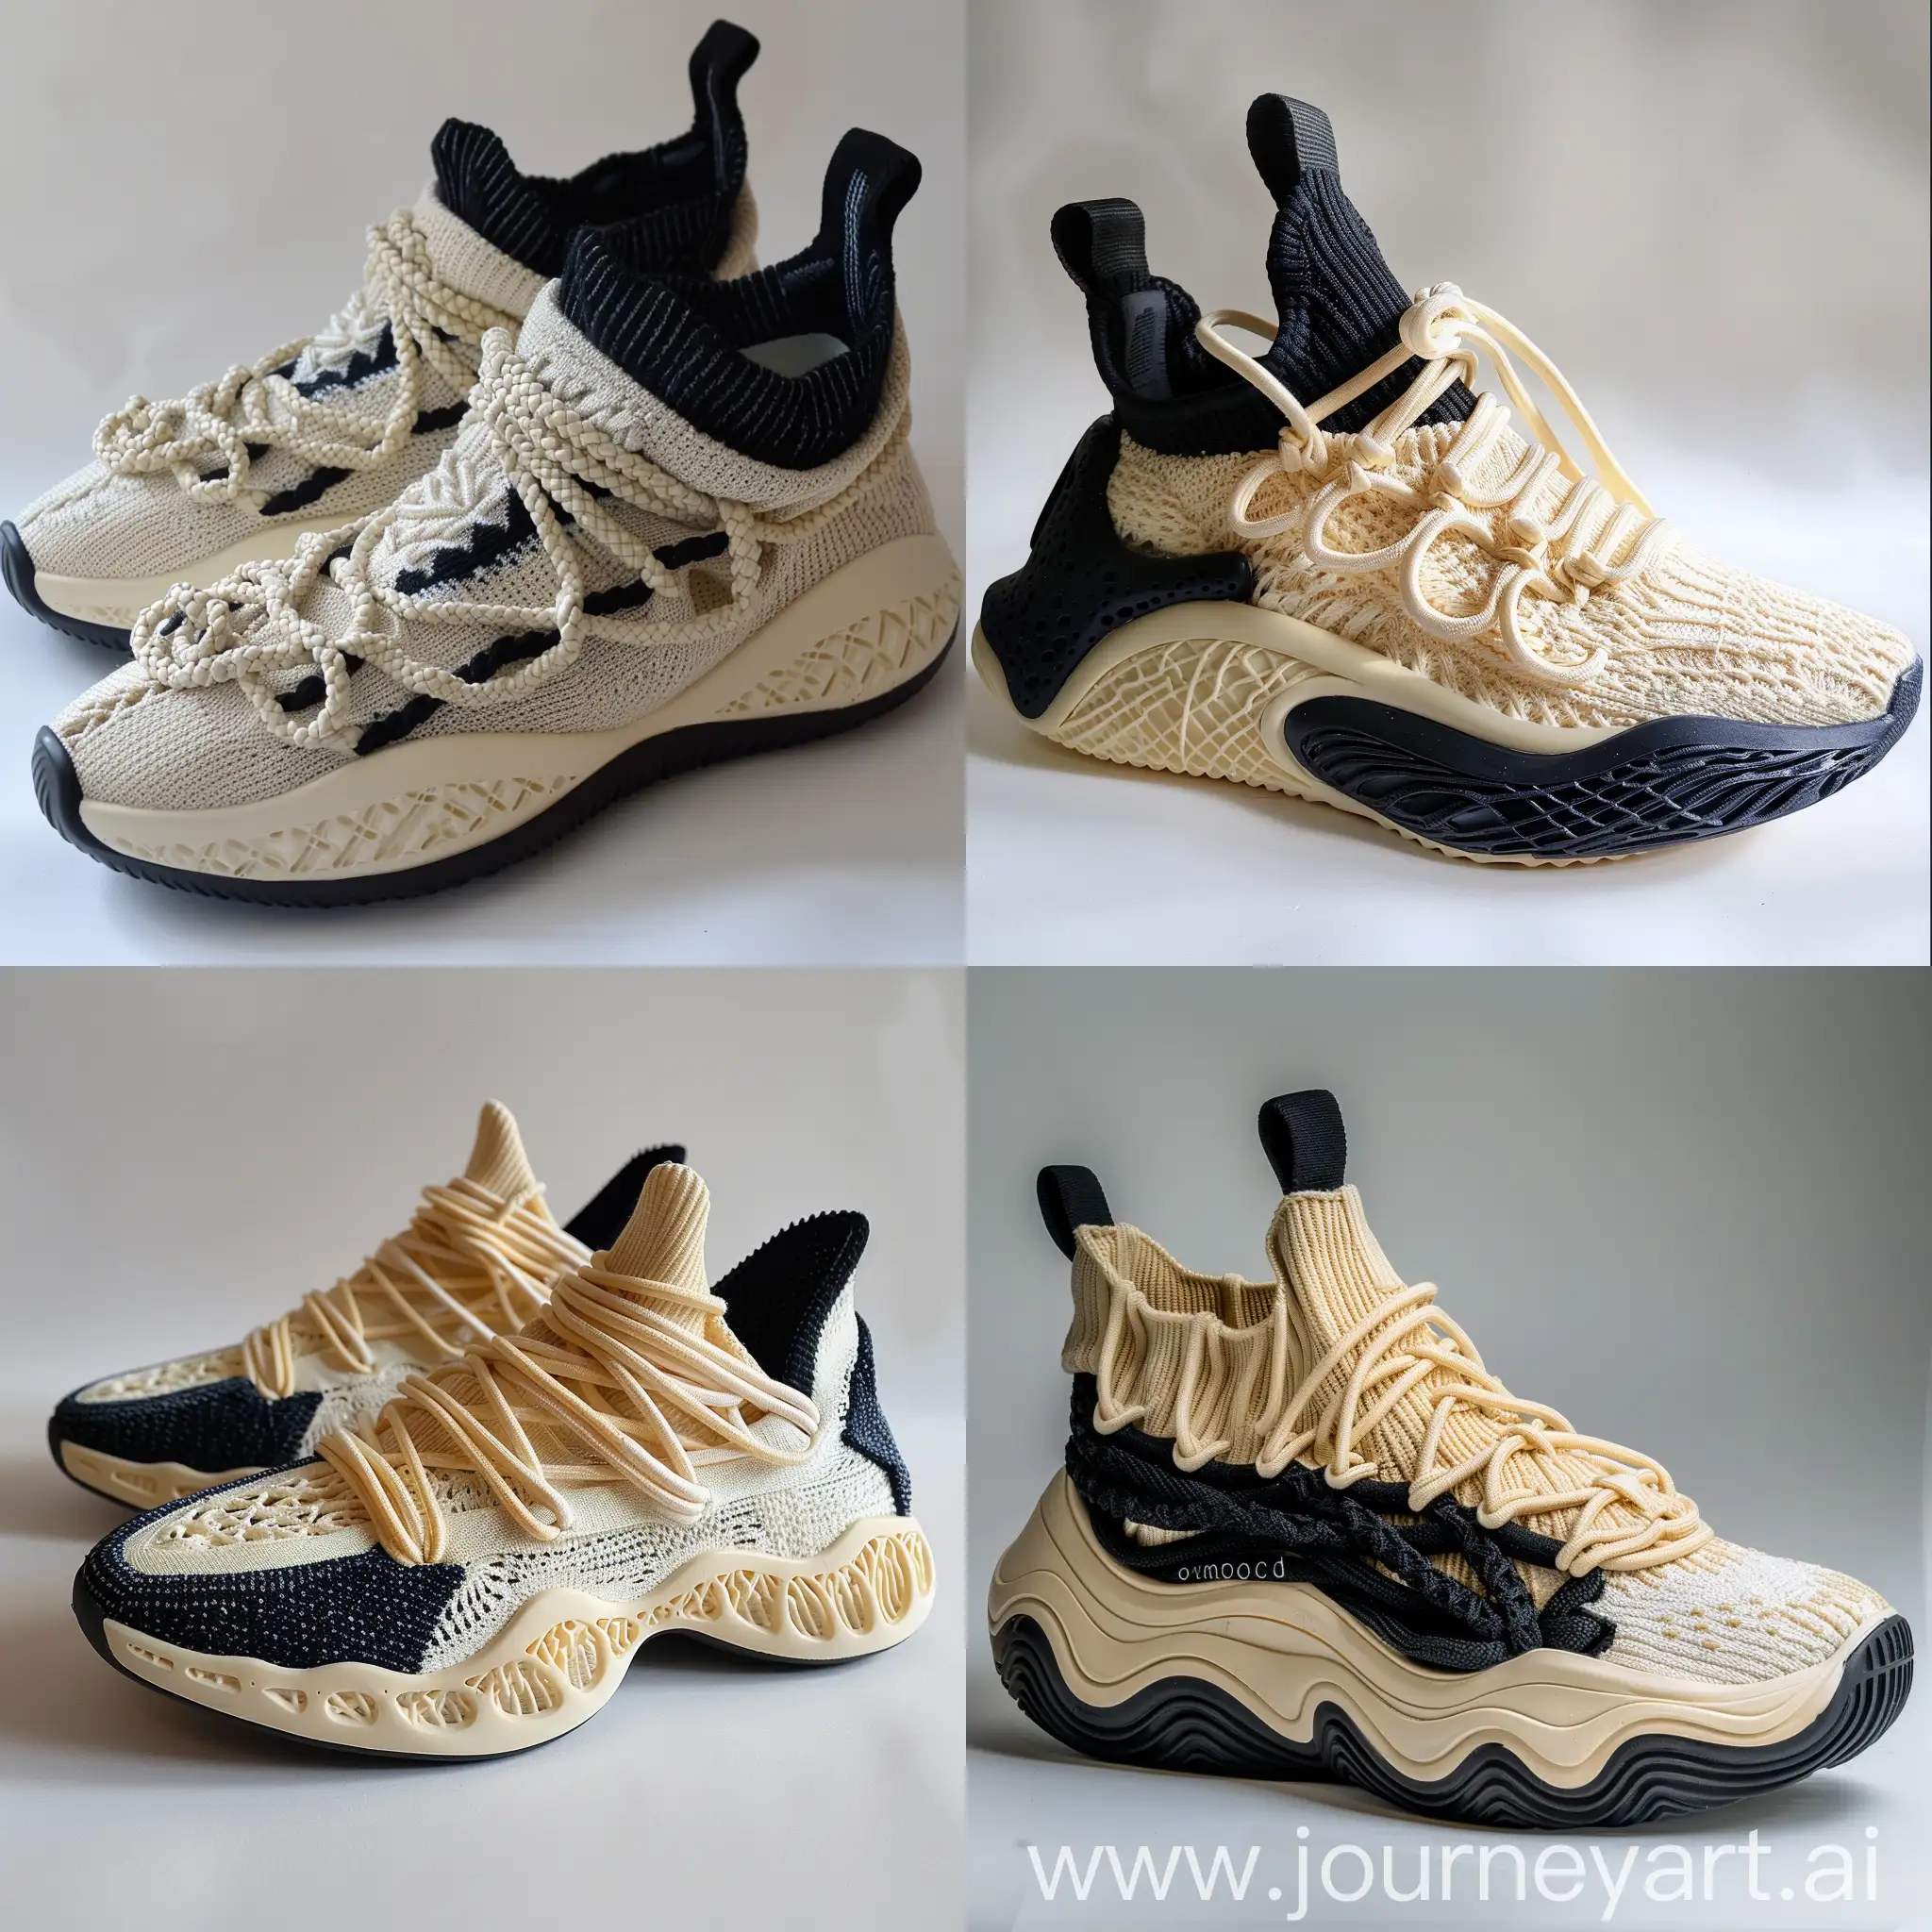 Sneakers design  , inspired by orca whale , cream color rubber midsole , knitted cables on midsole , some knitted cables on upper , upper color black and cream , low neck , black outsole , knitted laces 